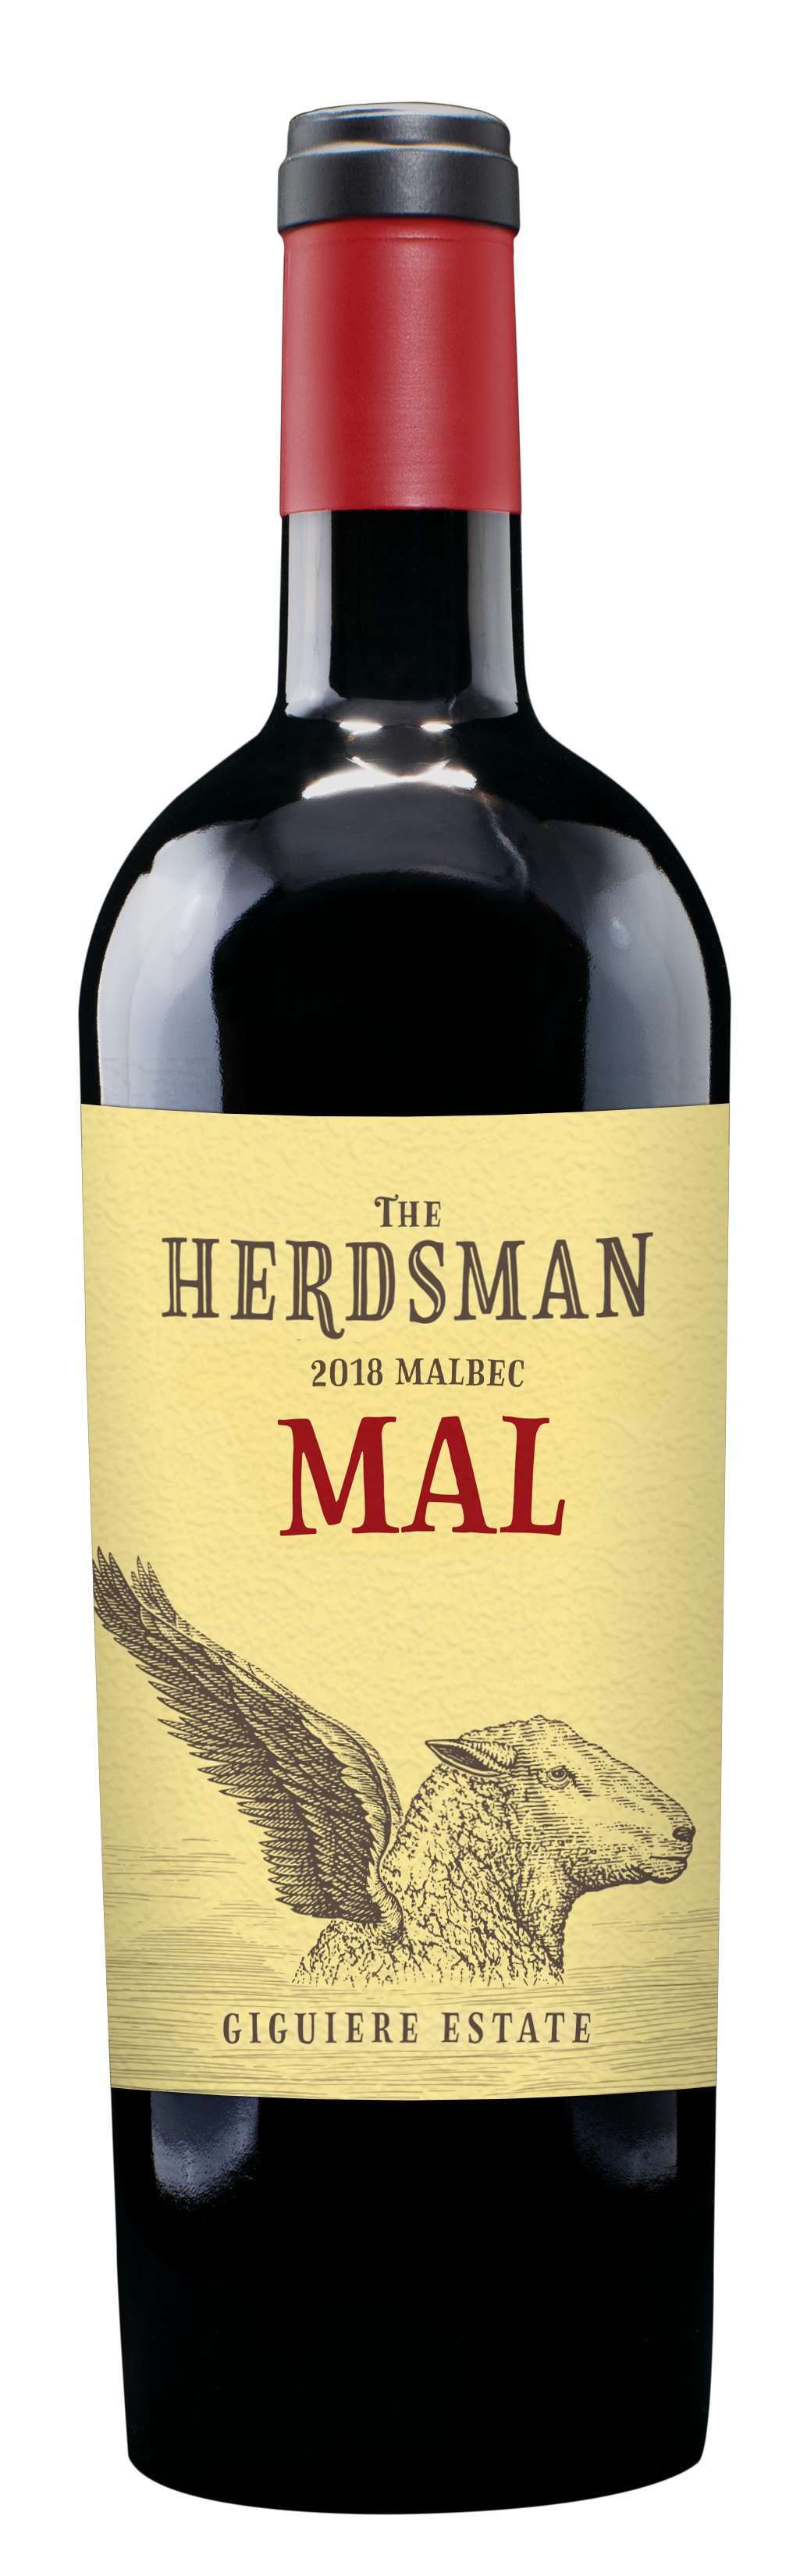 Product Image for 2018 Herdsman Malbec